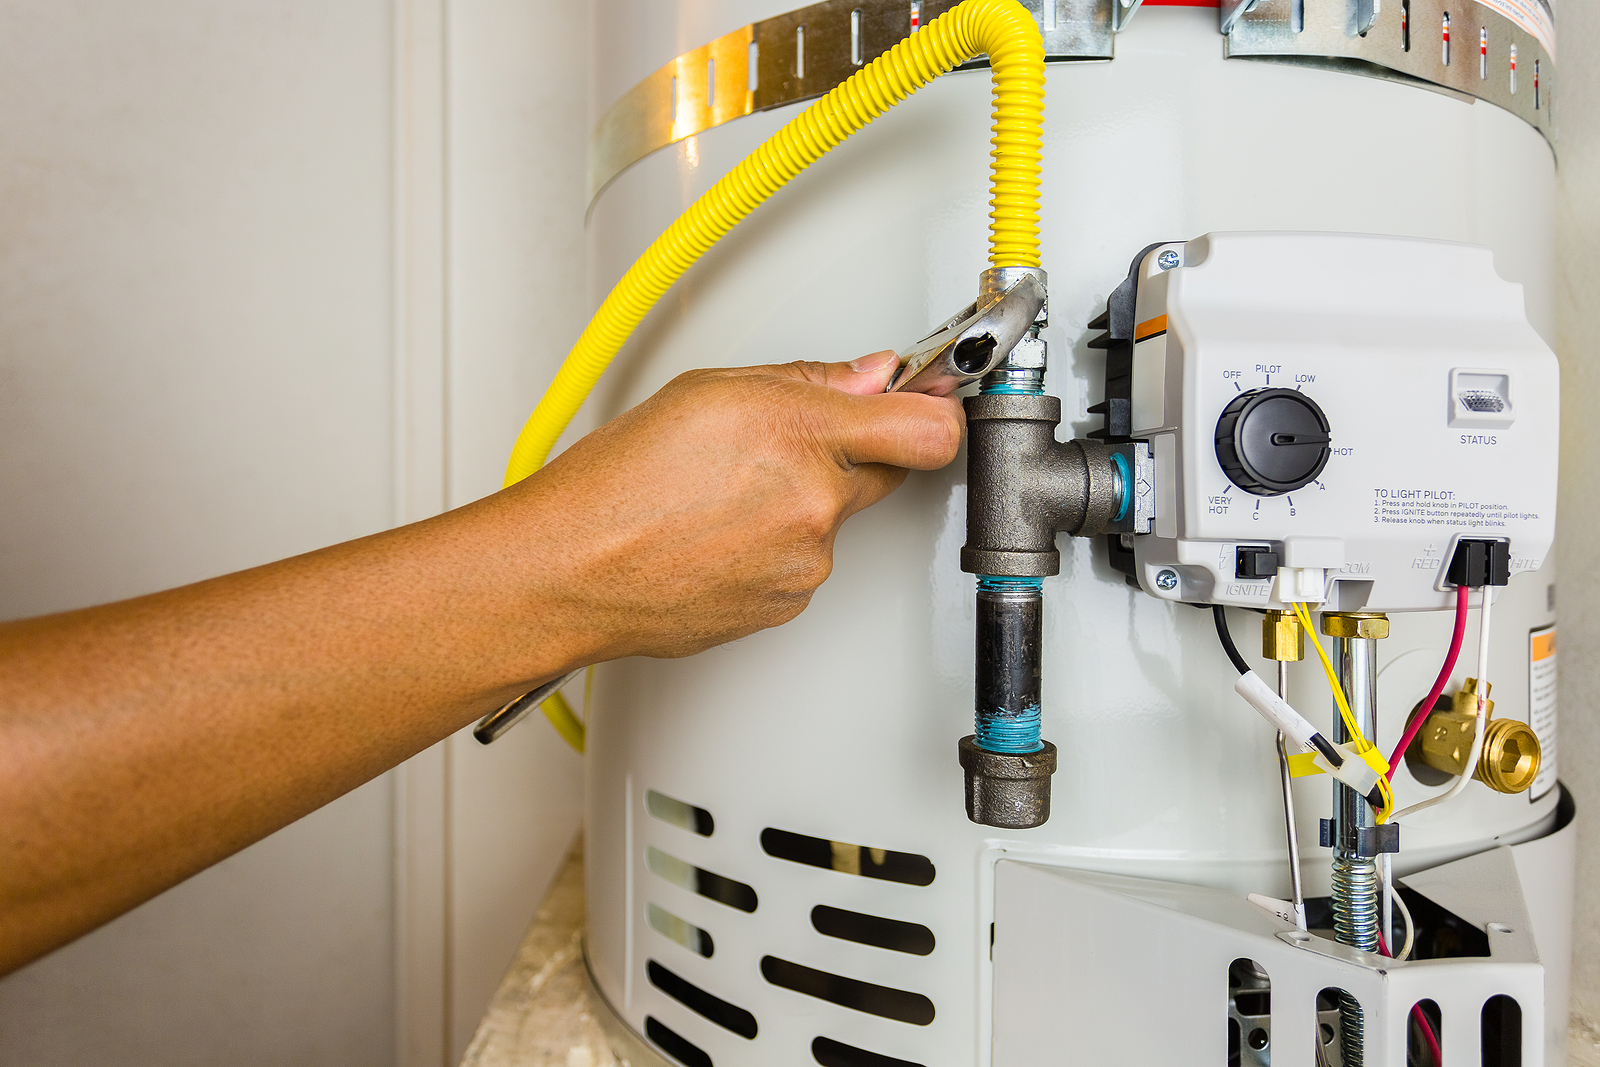 https://www.allamericanpha.com/wp-content/uploads/2022/11/tips-for-maintaining-your-hot-water-heater.jpg